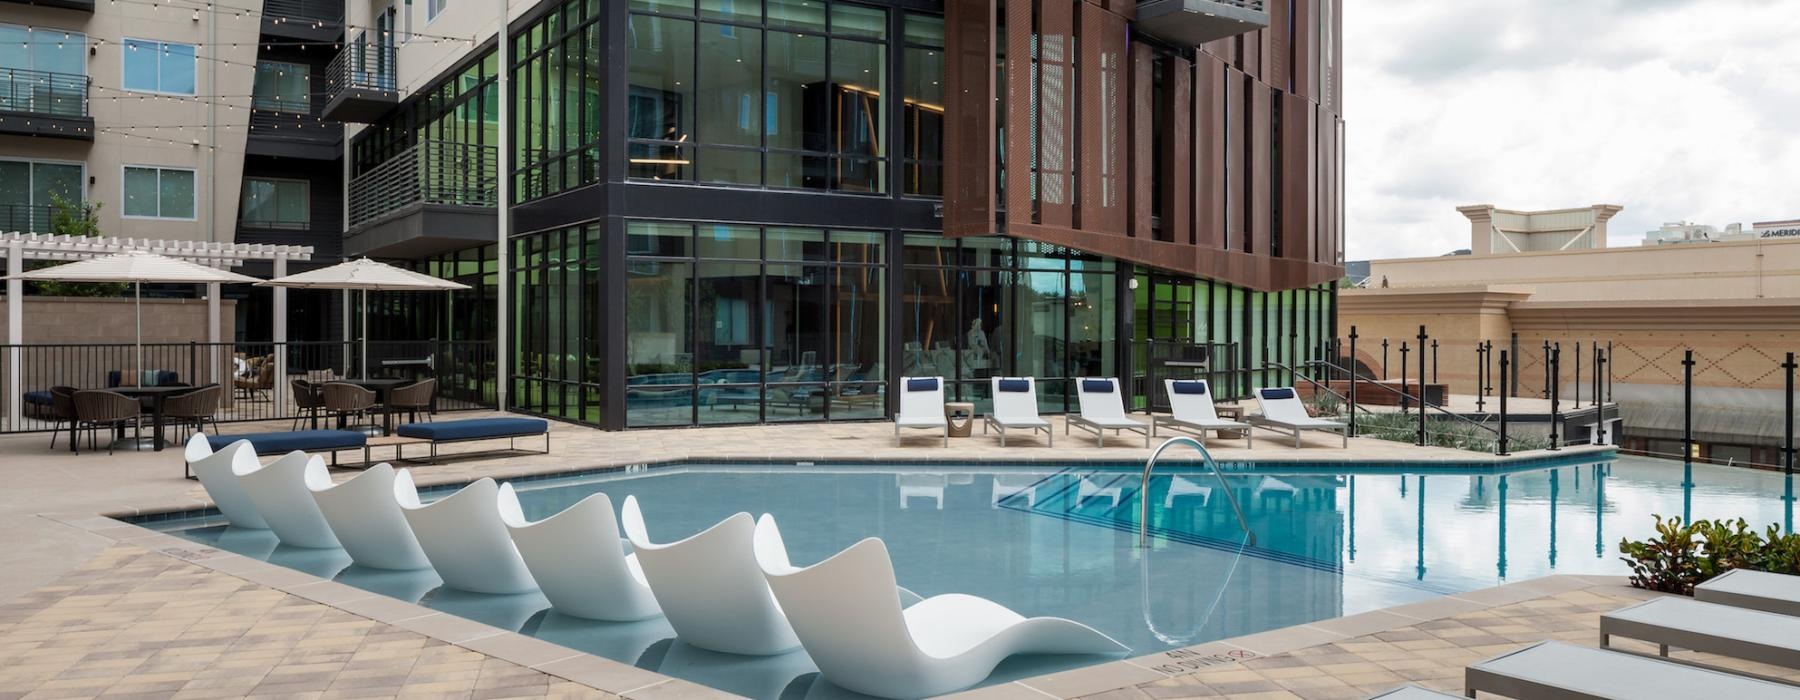 a building with a pool and chairs in front of it